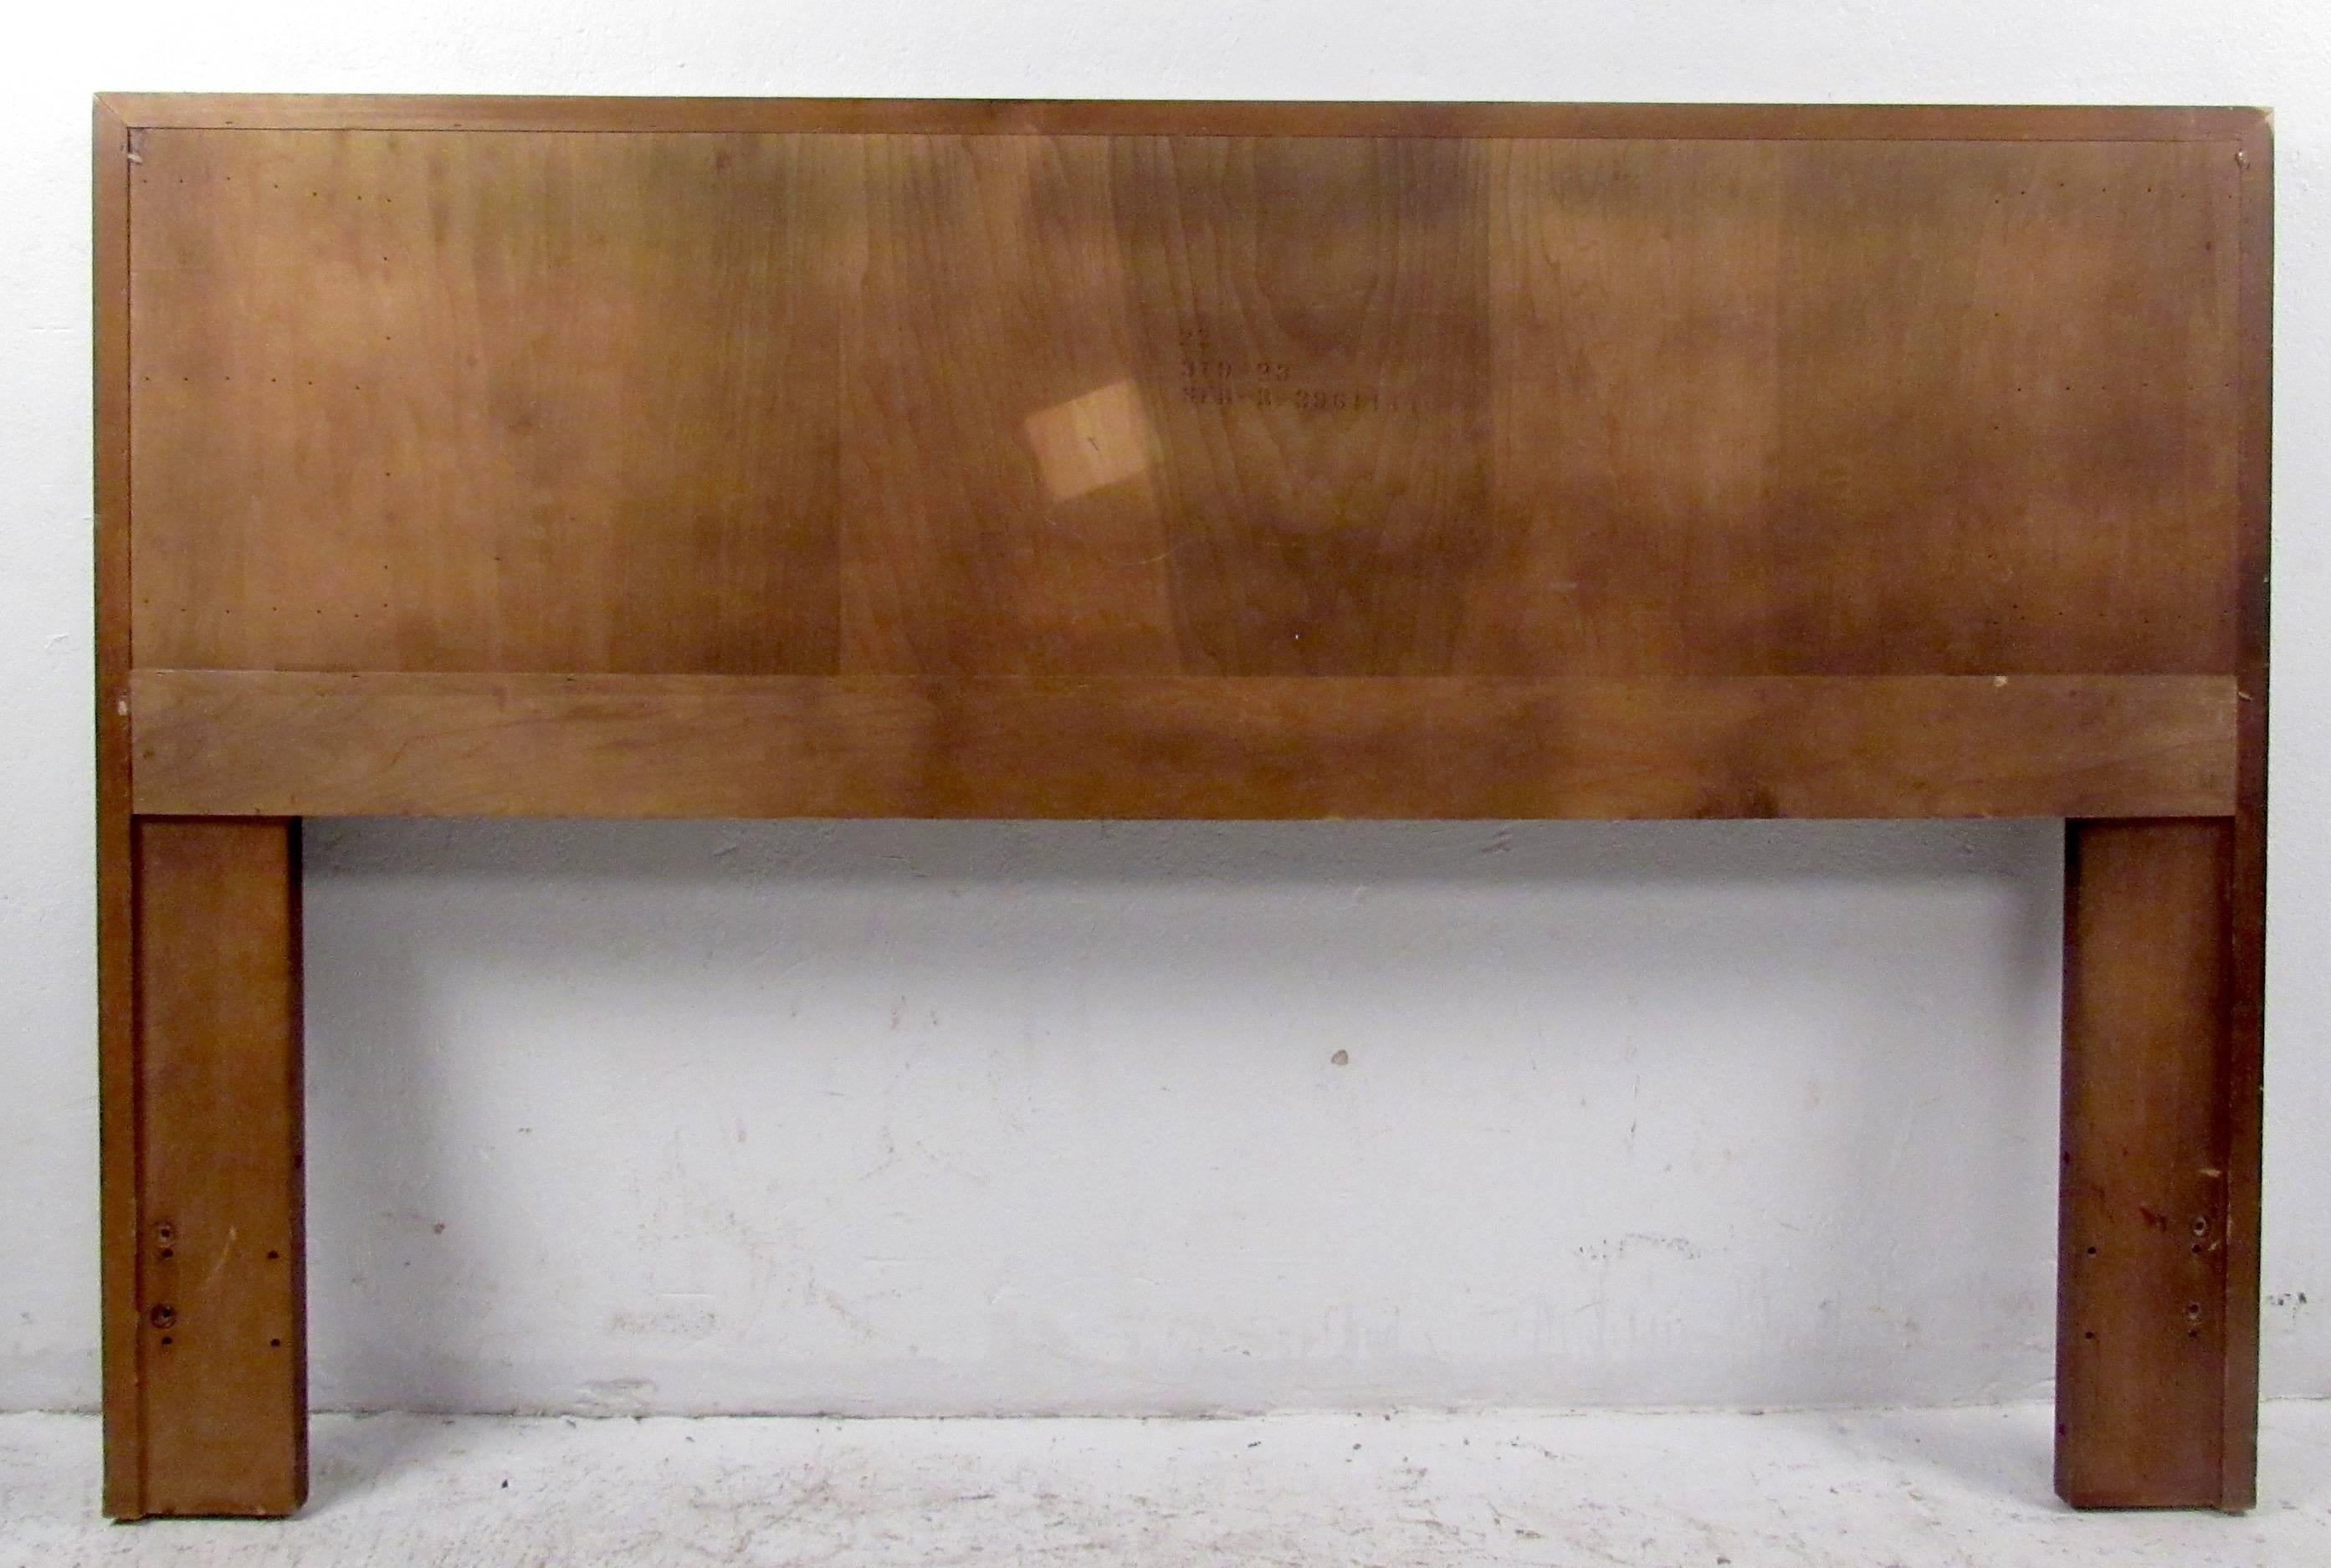 Vintage modern walnut headboard designed in the manner of Lane.

Please confirm item location NY or NJ with dealer.